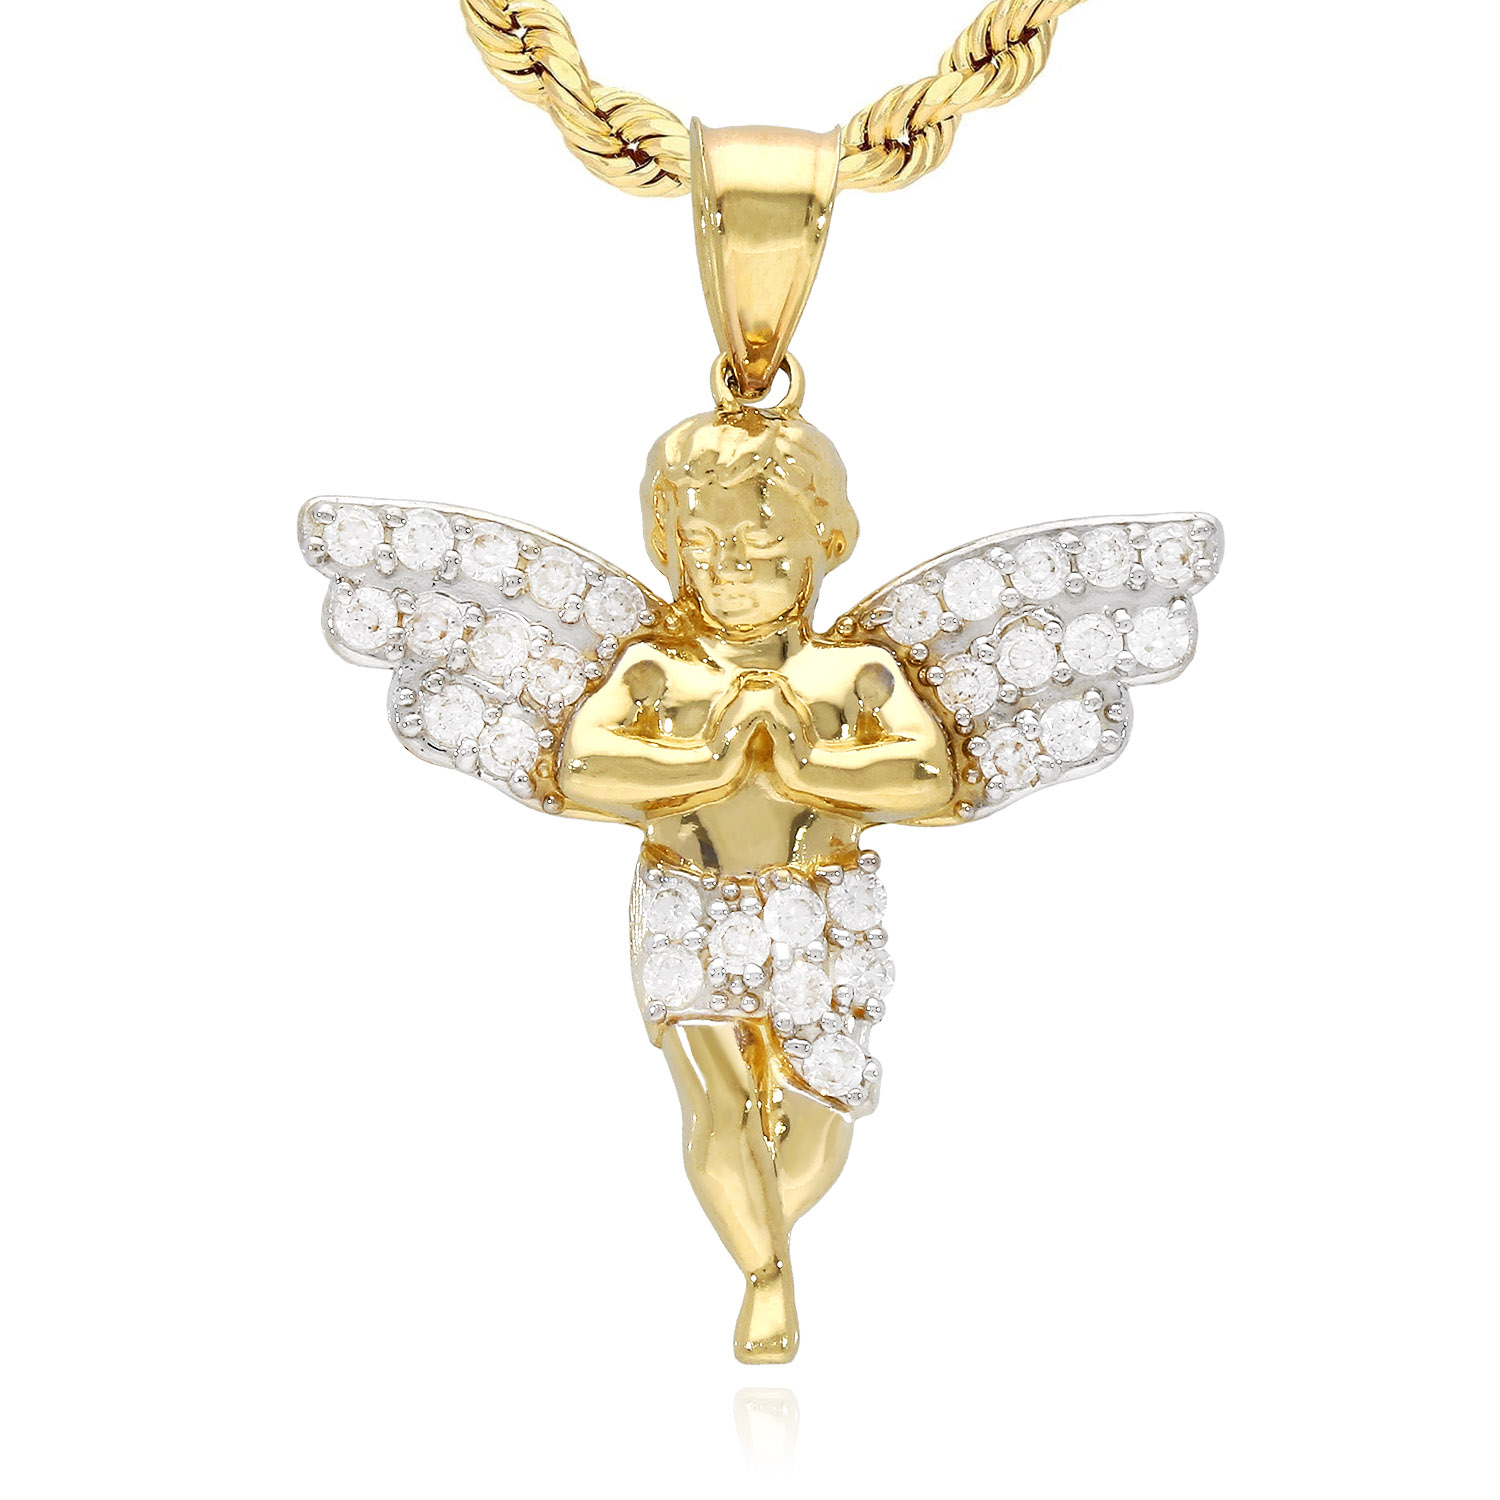 14K Solid Yellow Gold Simulated Diamond Religious Baby Angel Charm Pendant - Small